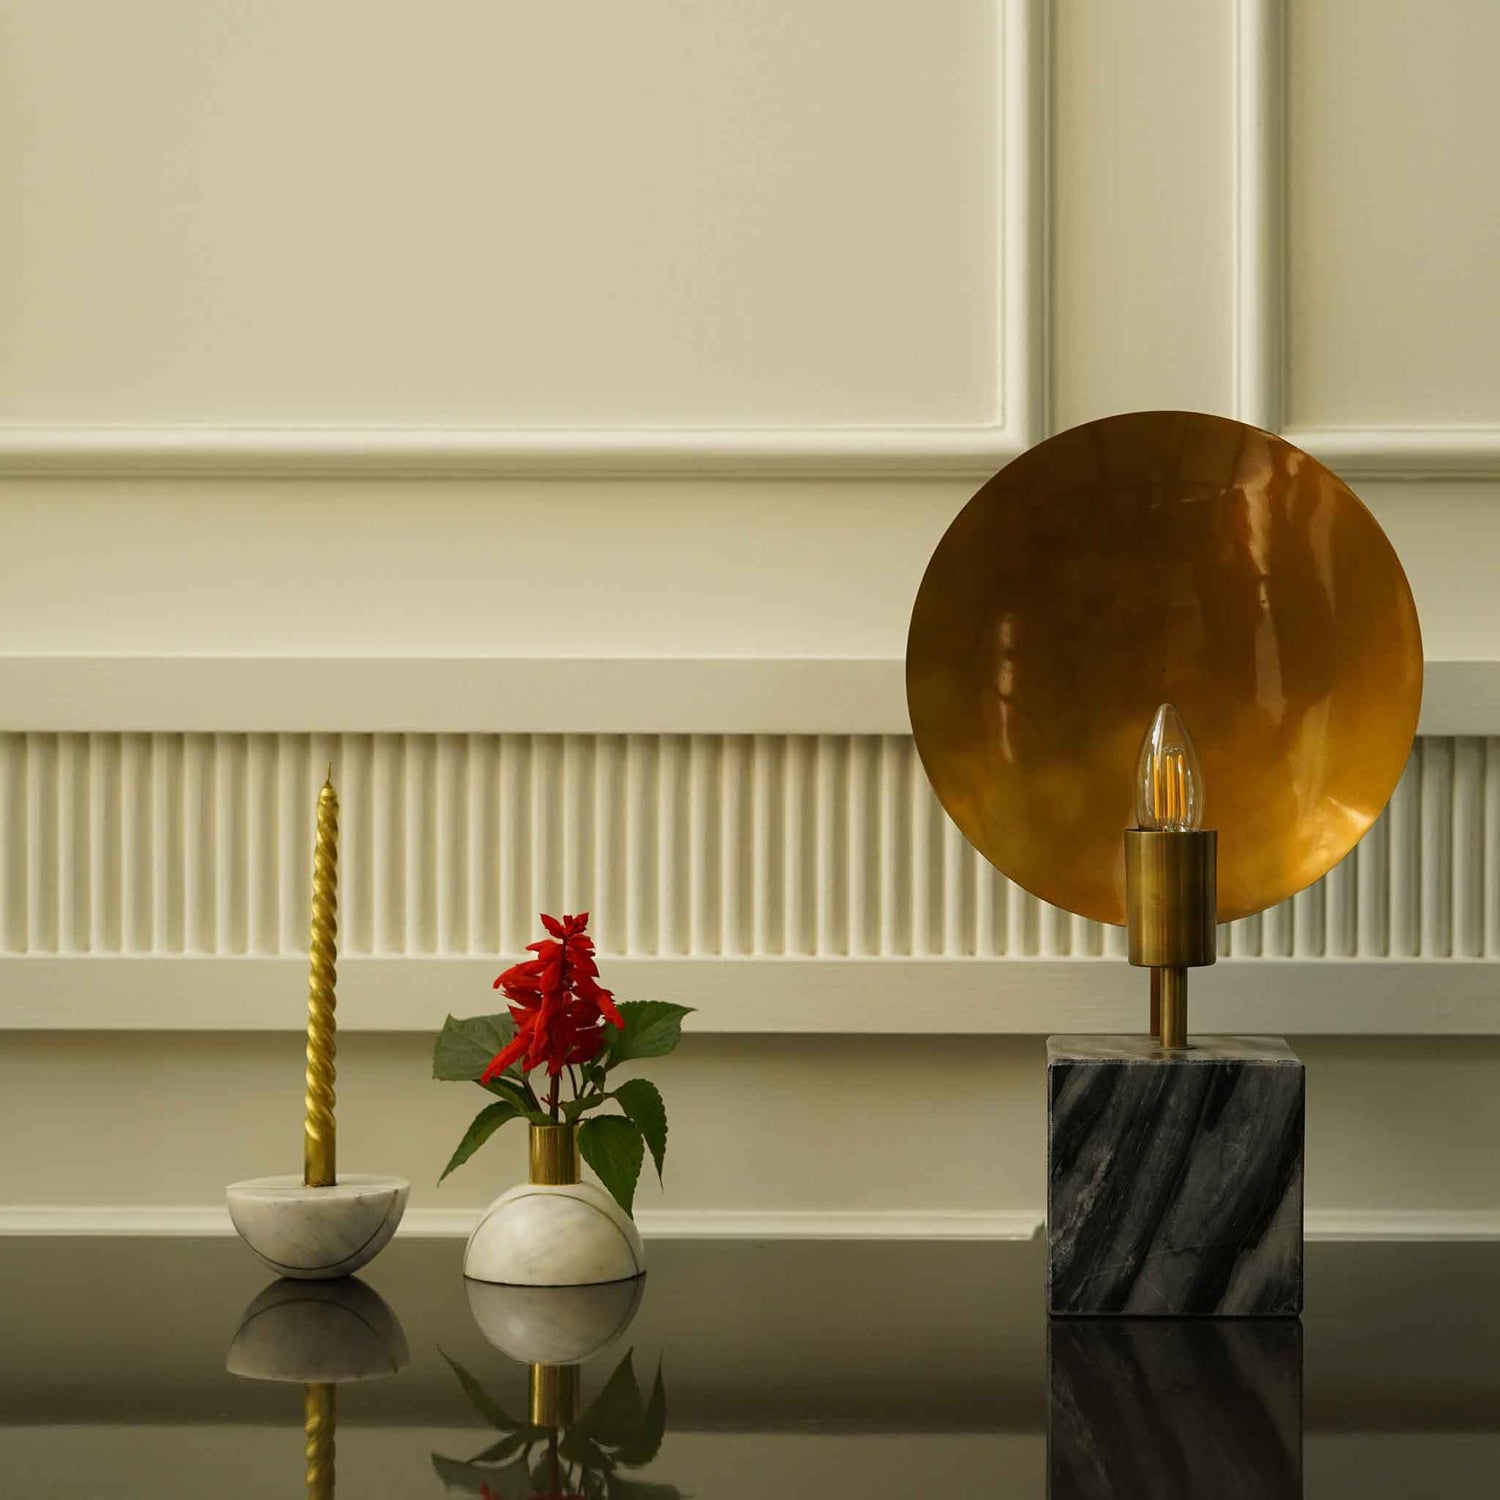 A decorative spherical marble candle-cum-plant holder placed next to an artistic table lamp made out of concrete base.